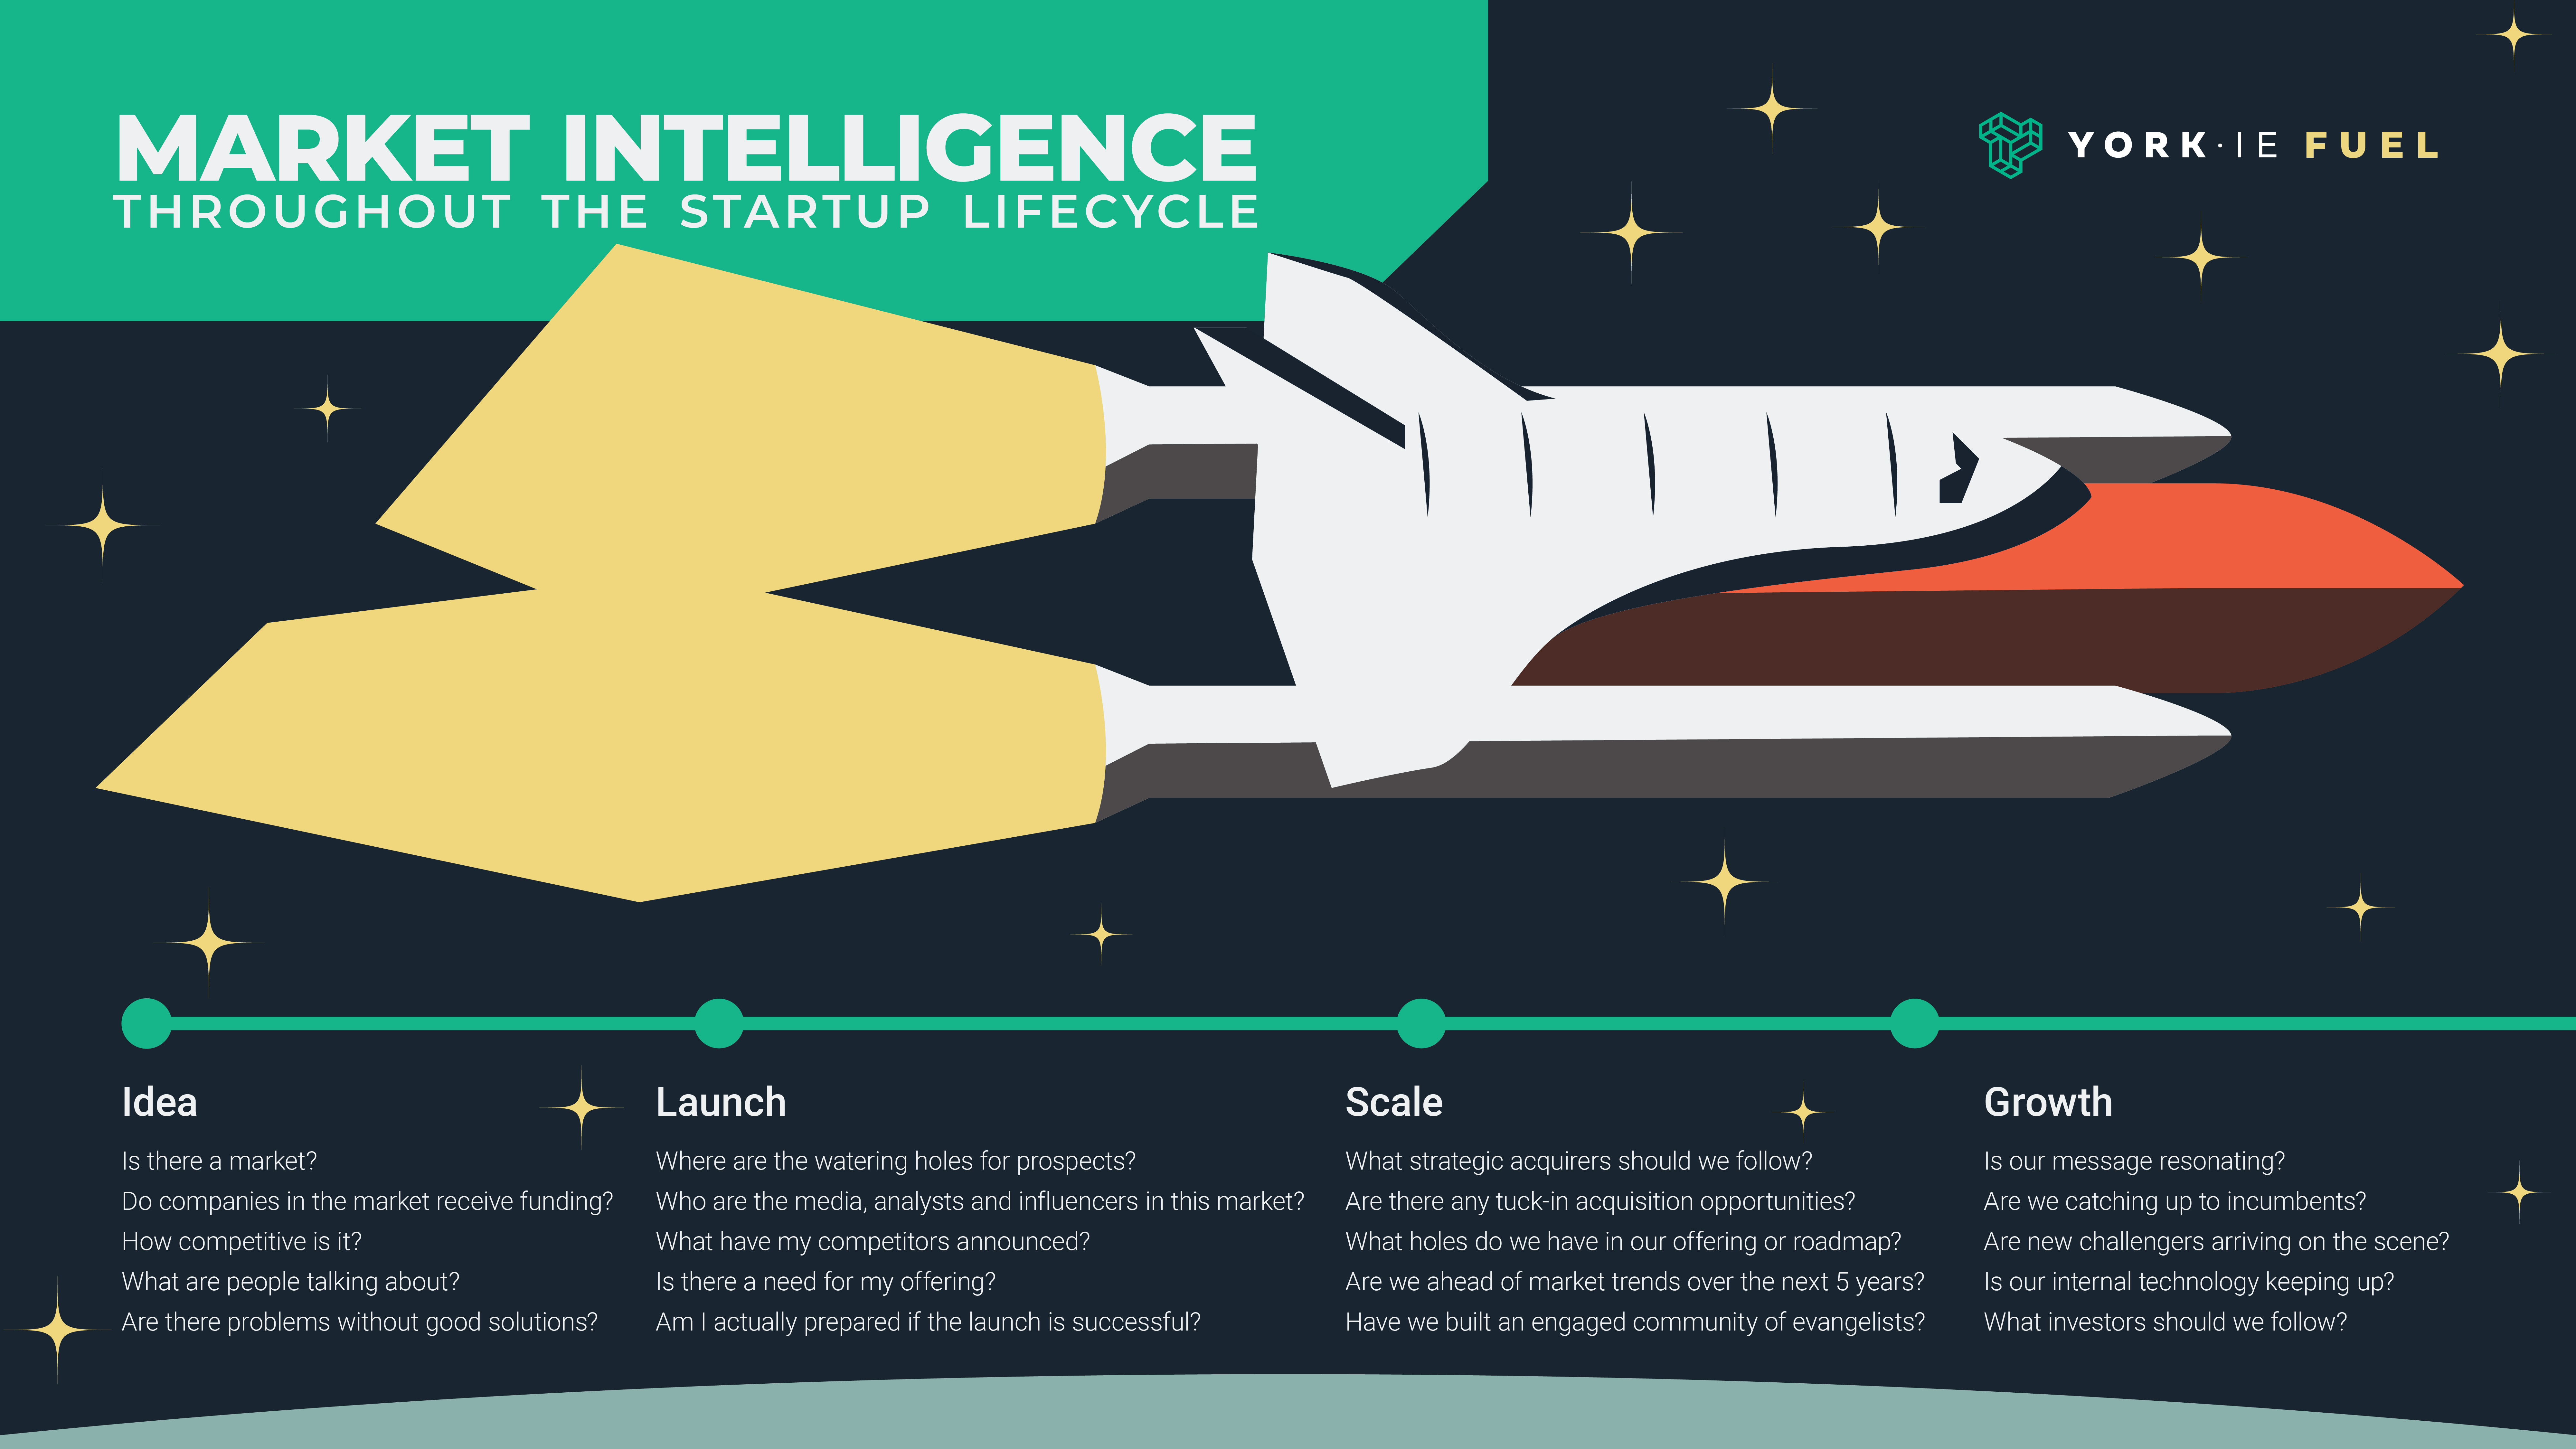 Market and Competitive Intelligence Throughout the Startup Lifecycle: Idea, launch, scale and growth